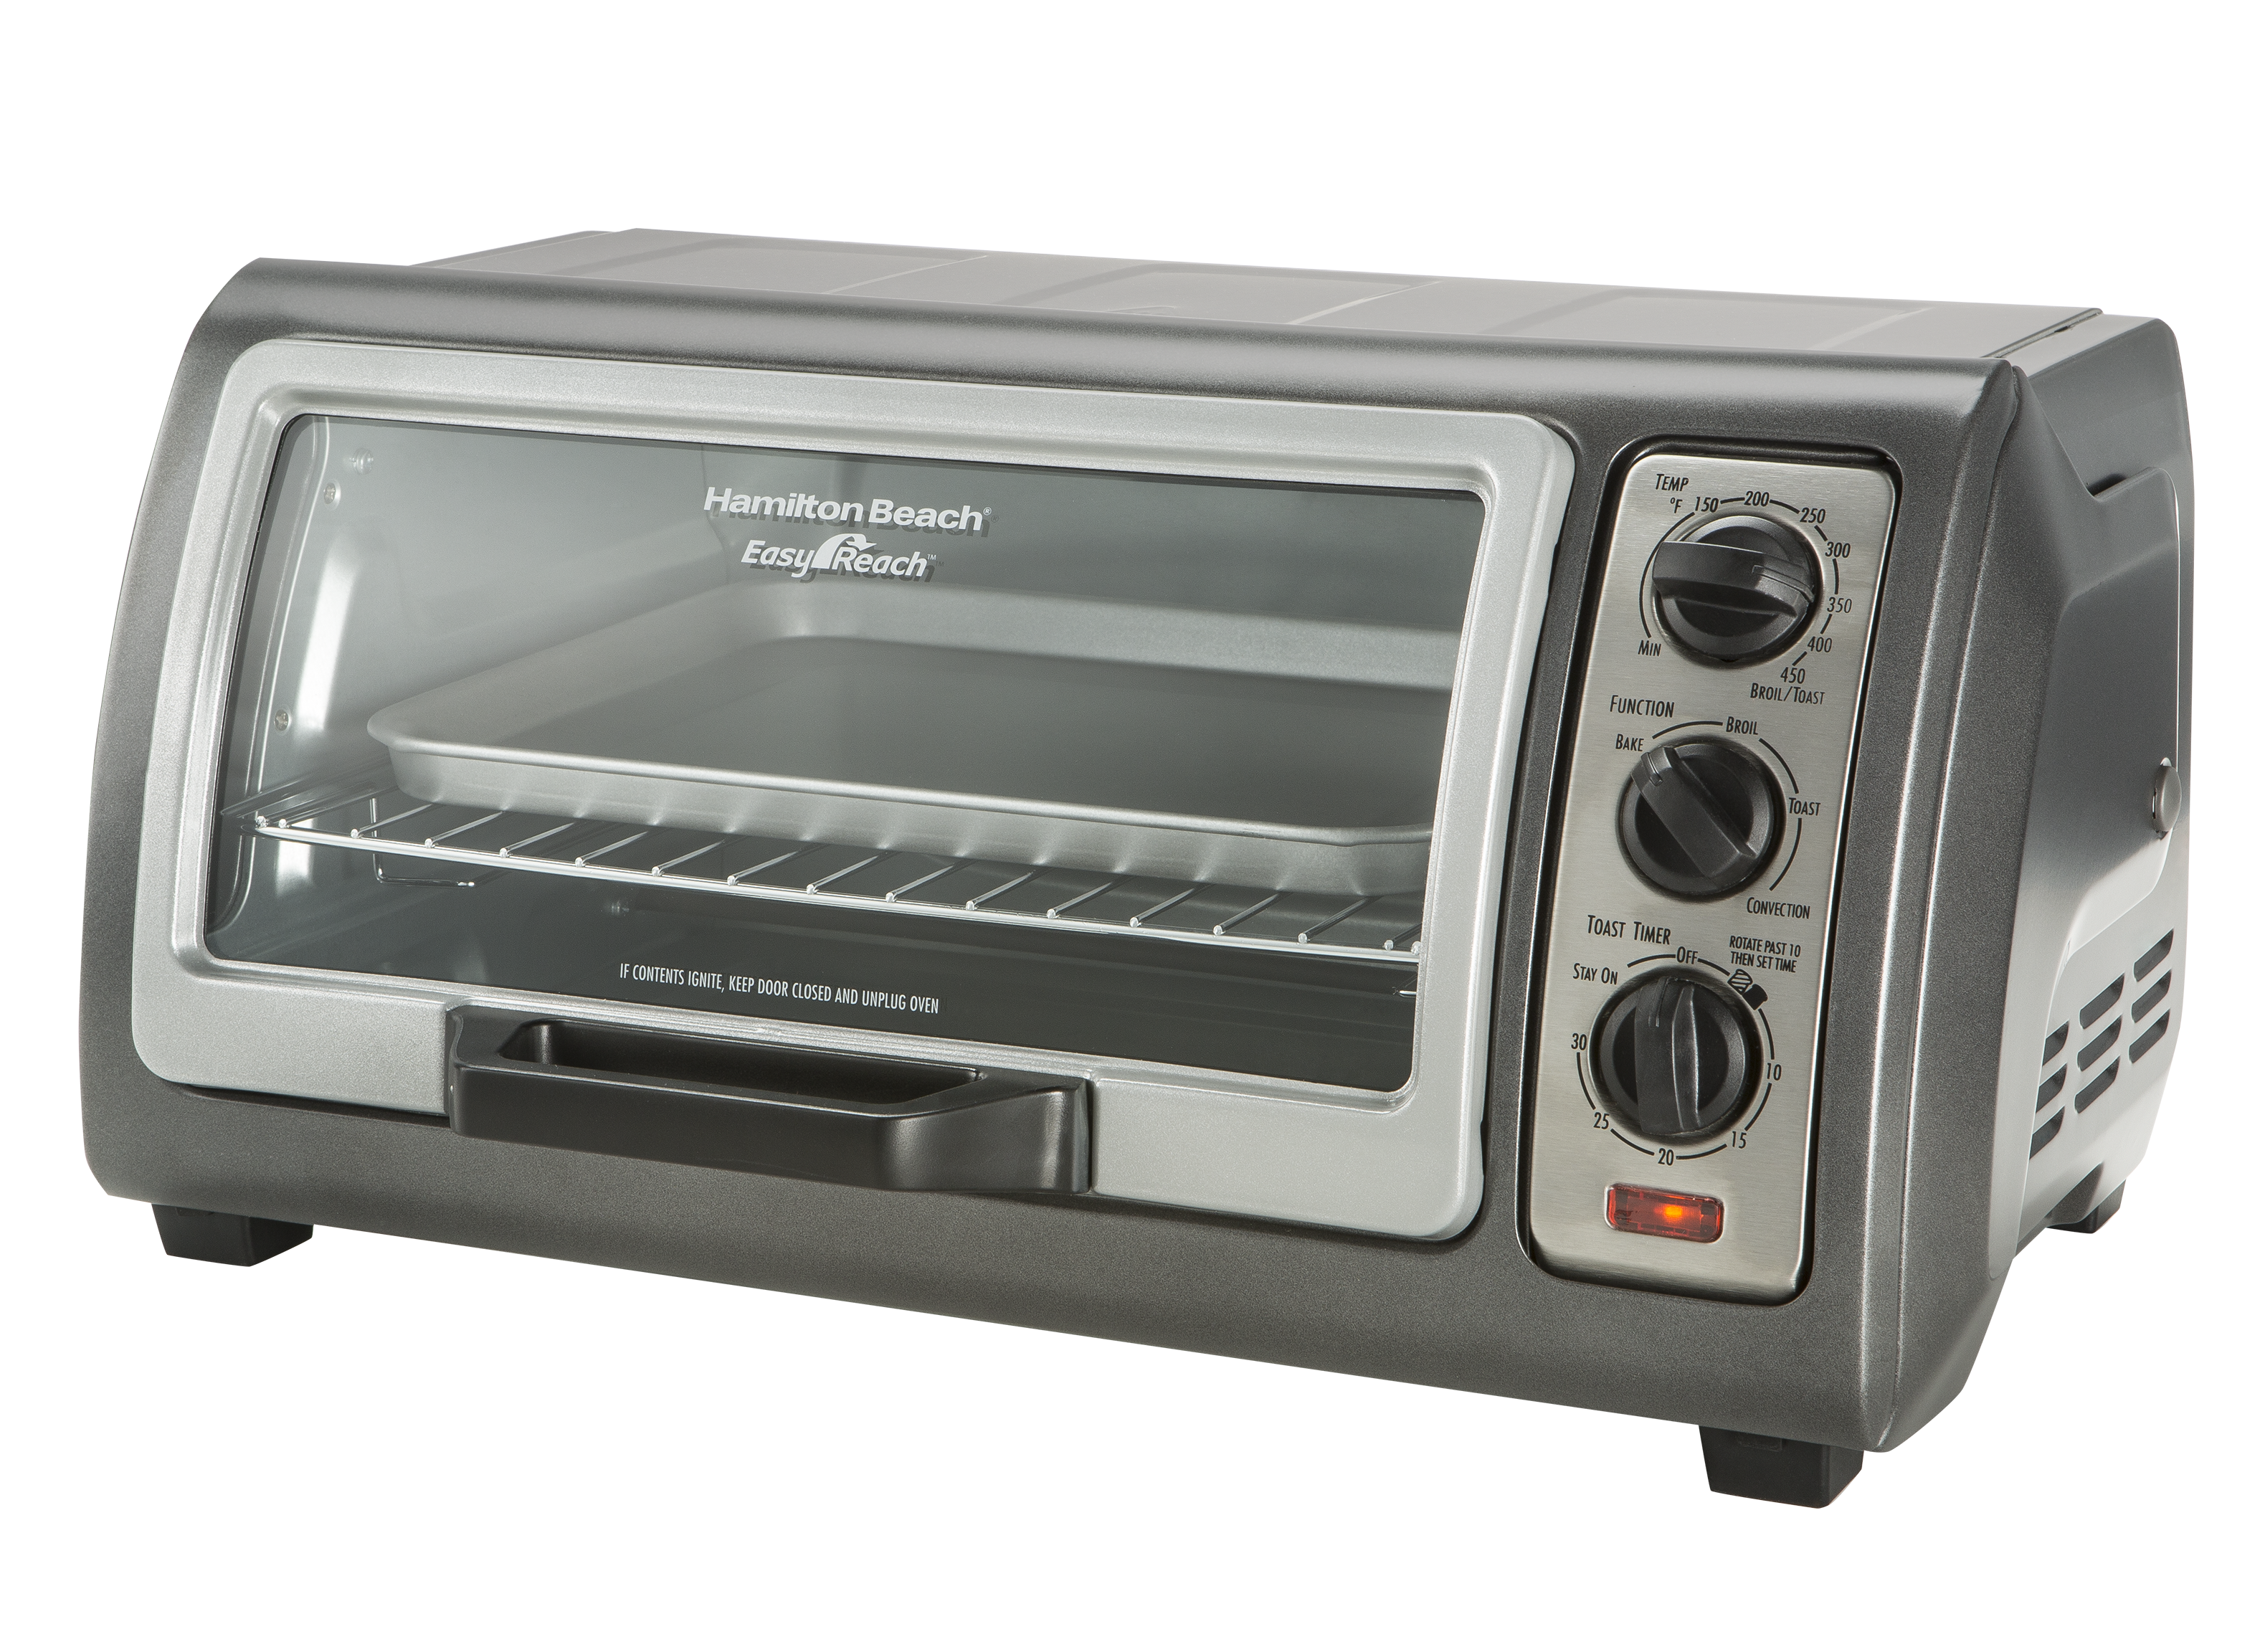 https://crdms.images.consumerreports.org/prod/products/cr/models/387681-toasterovens-hamiltonbeach-easyreach6slice31126.png